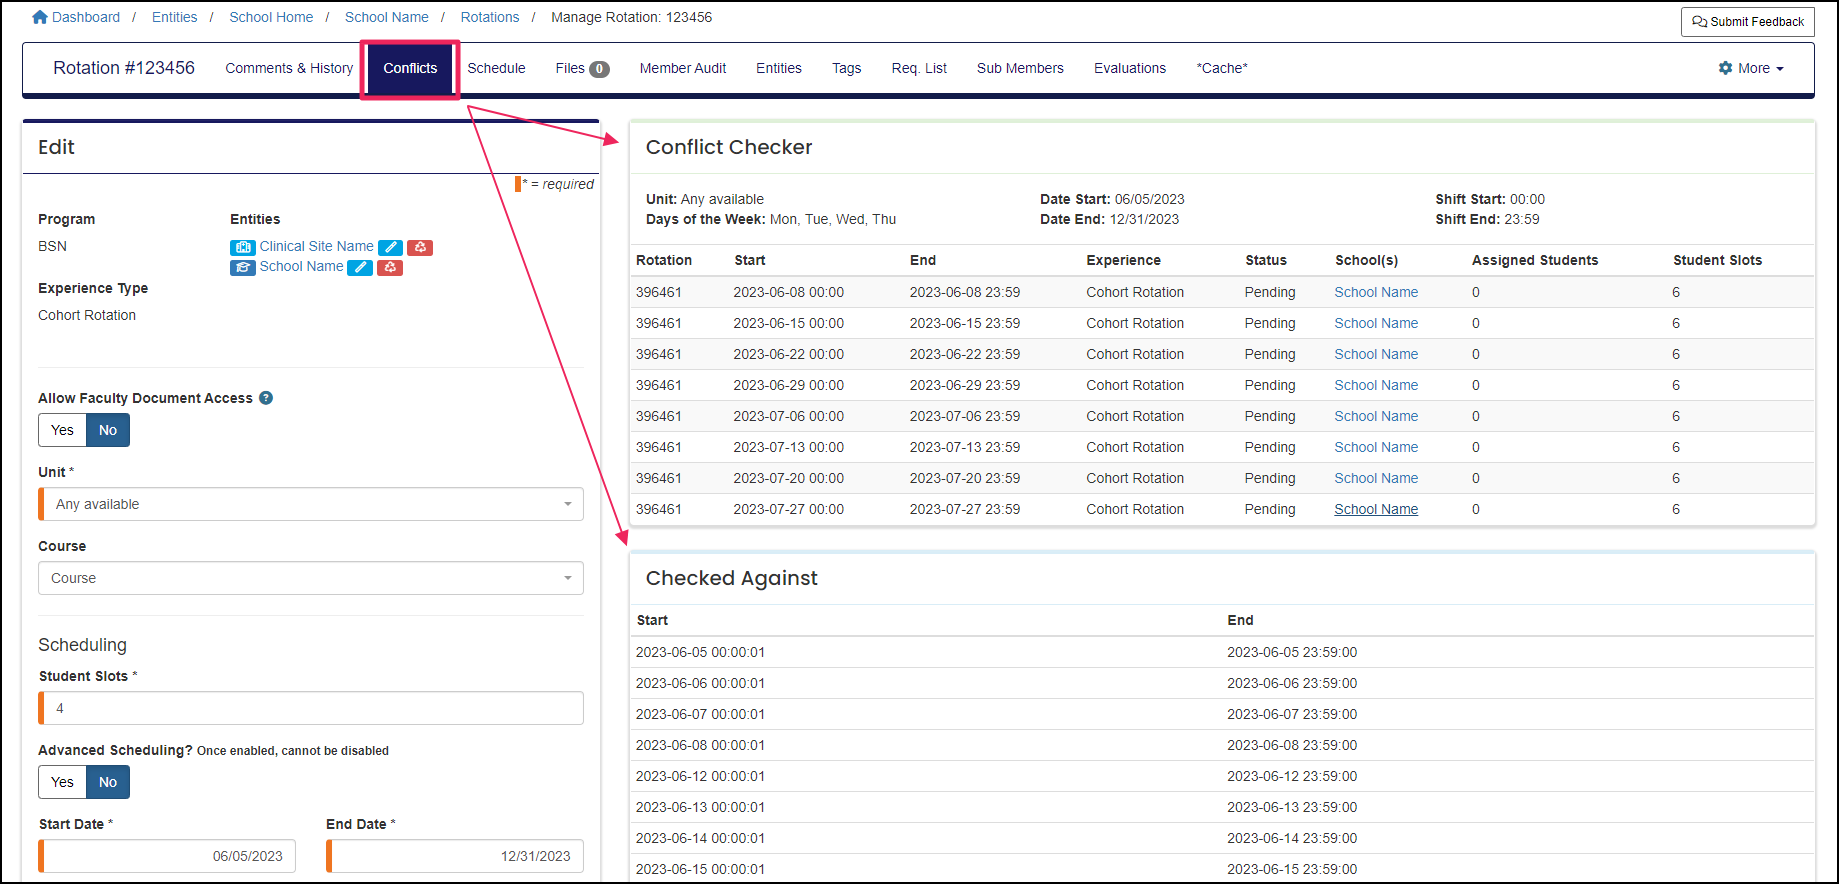 Image shows the conflicts tab and the Conflict Checker box with conflicting rotation.